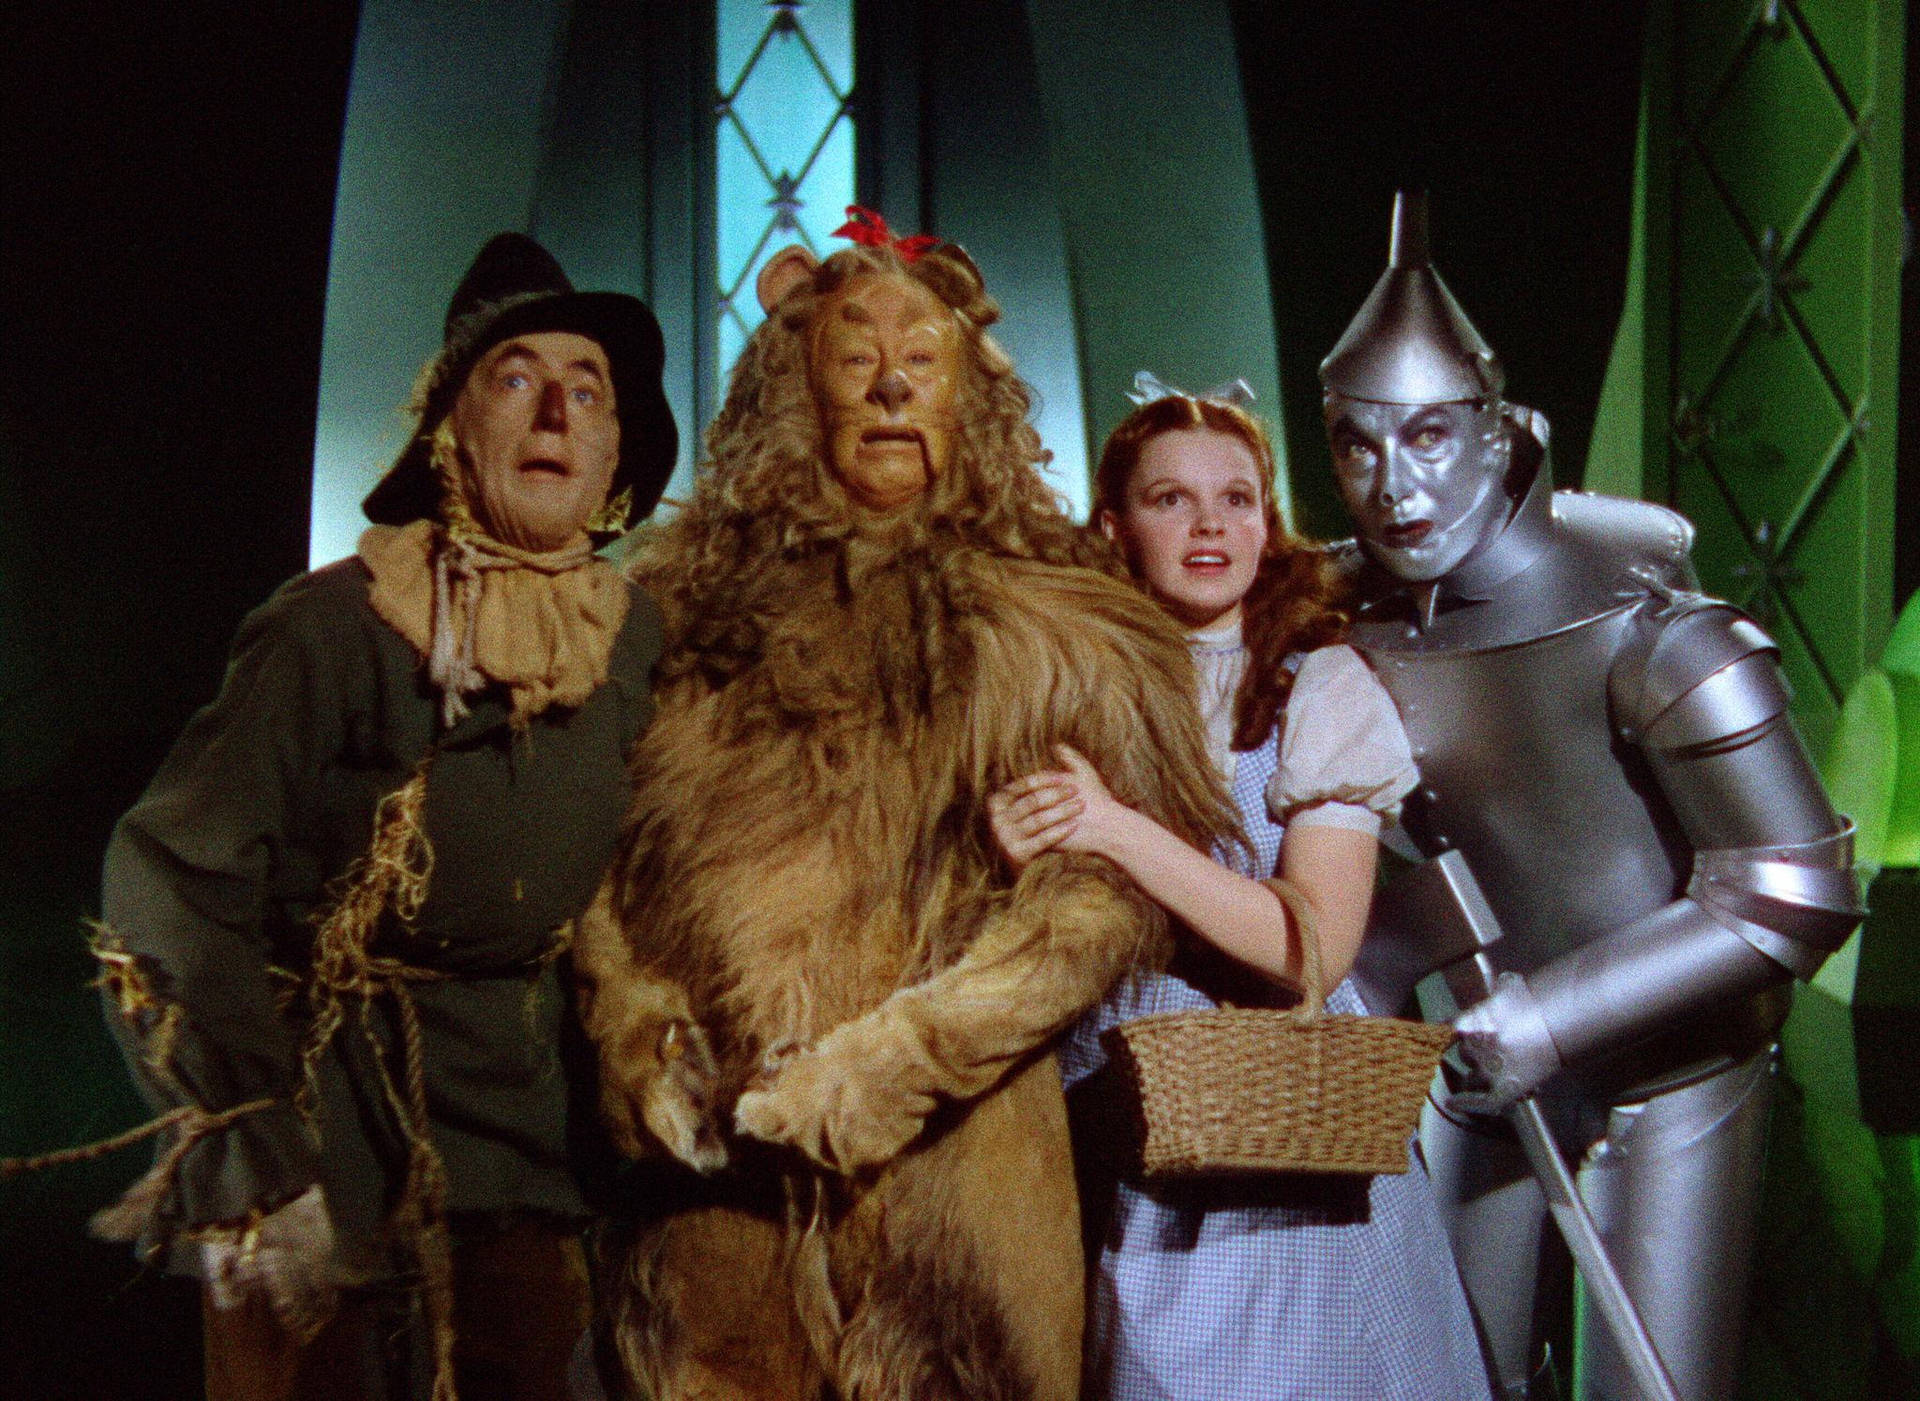 The Wizard Of Oz Cast Inside The Emerald City Palace Background